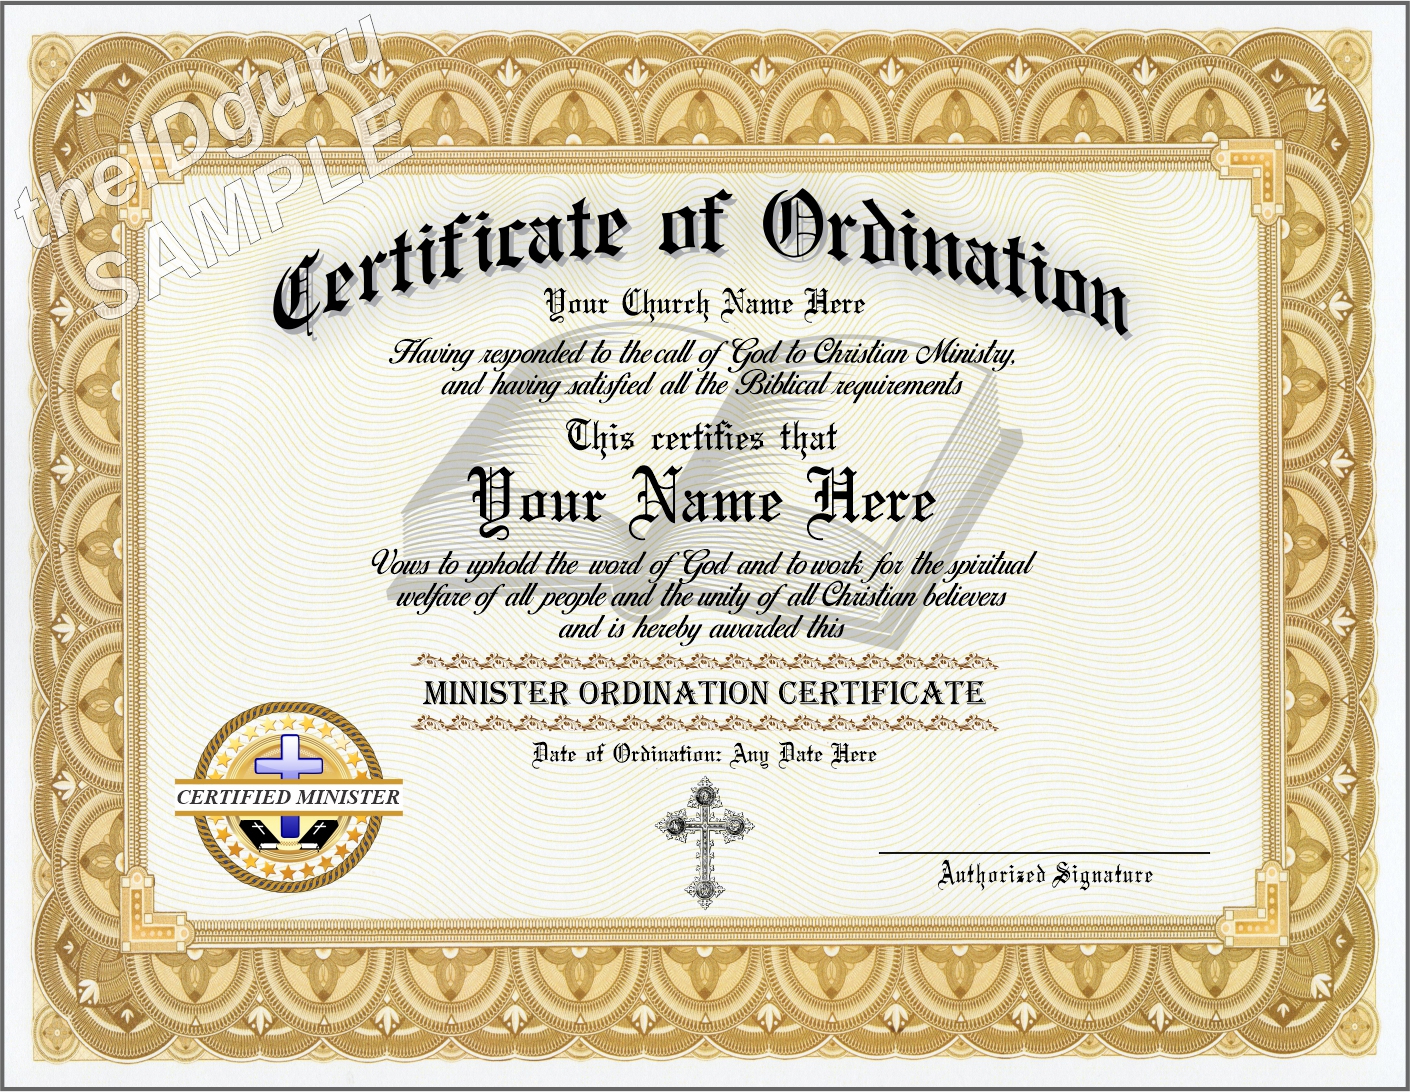 Ordained MINISTER Certificate Custom printed with your information